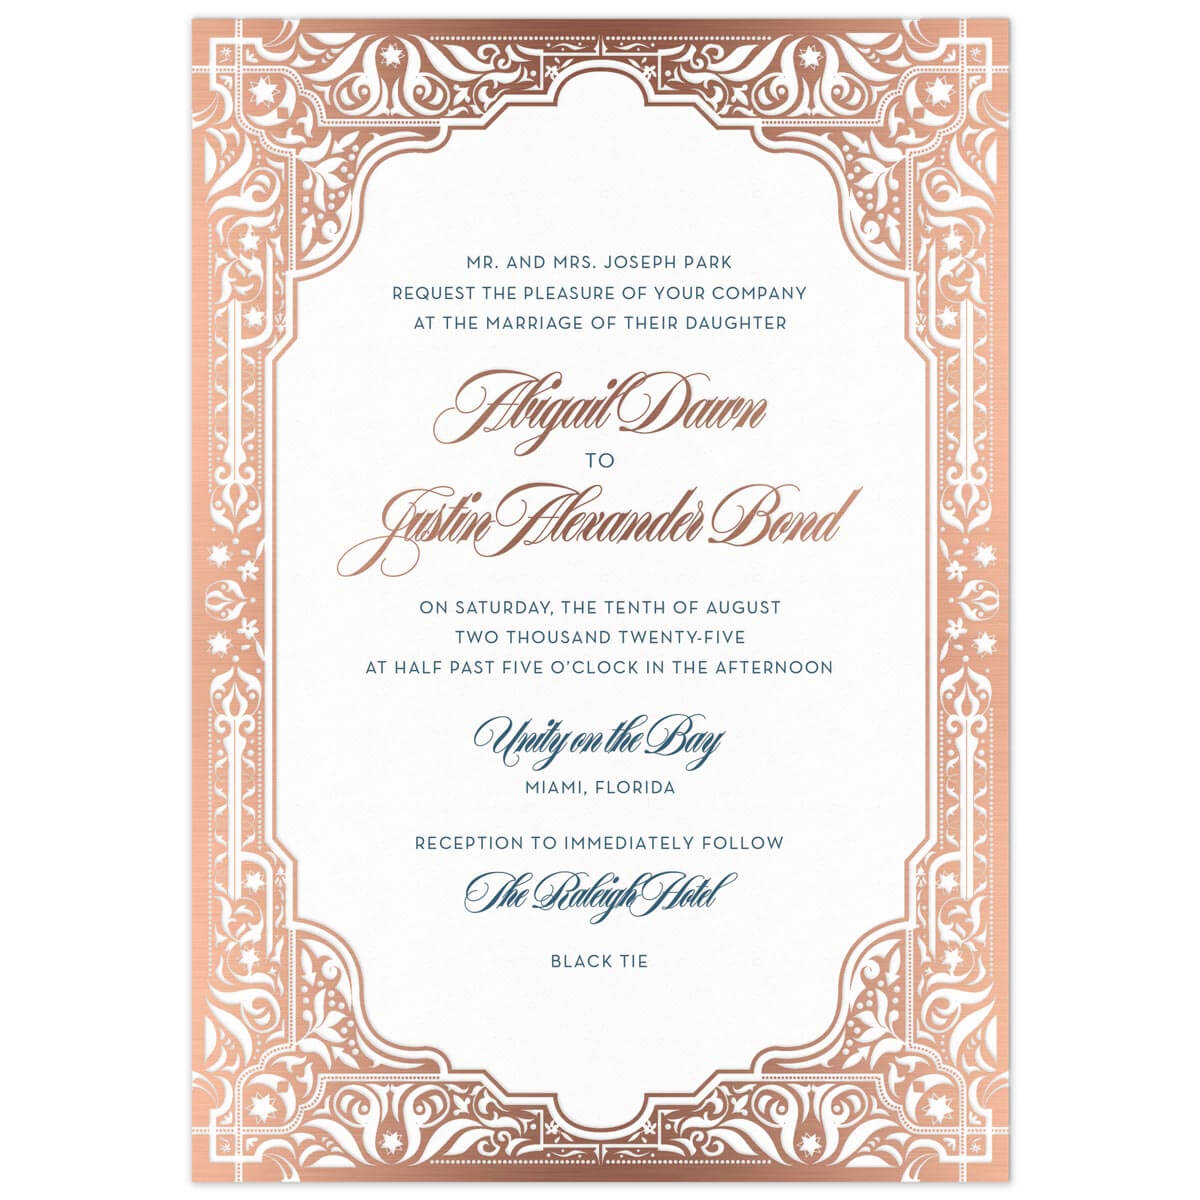 Middle Eastern border in rose gold on all edges of the invitation card. Navy and Rose gold block and script font centered in the frame.l